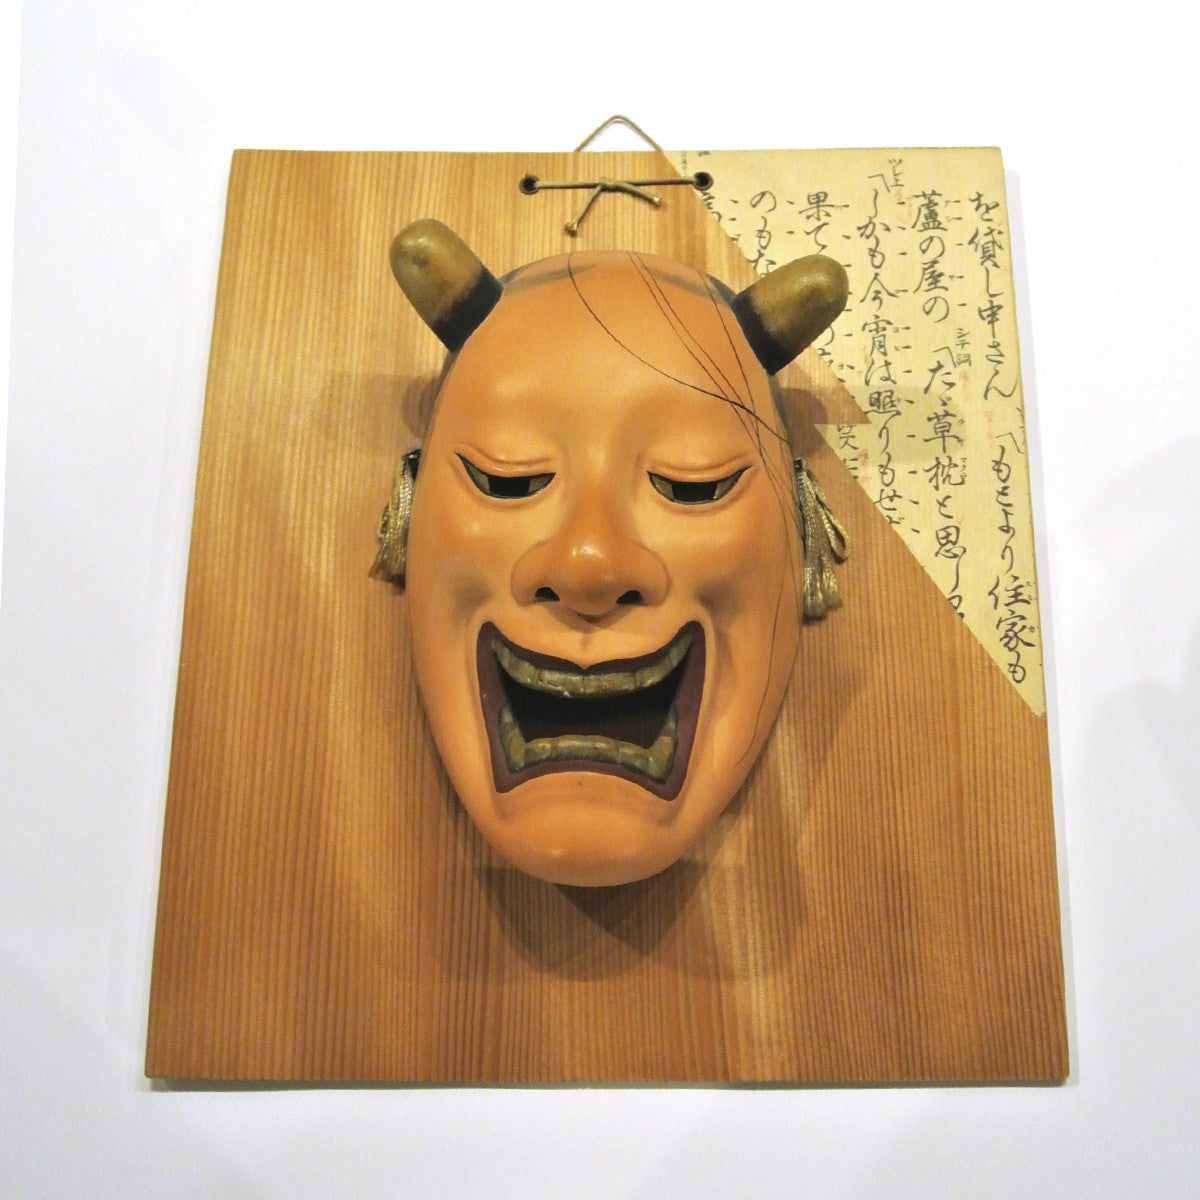 Japanese Mask from Persimmon Tree